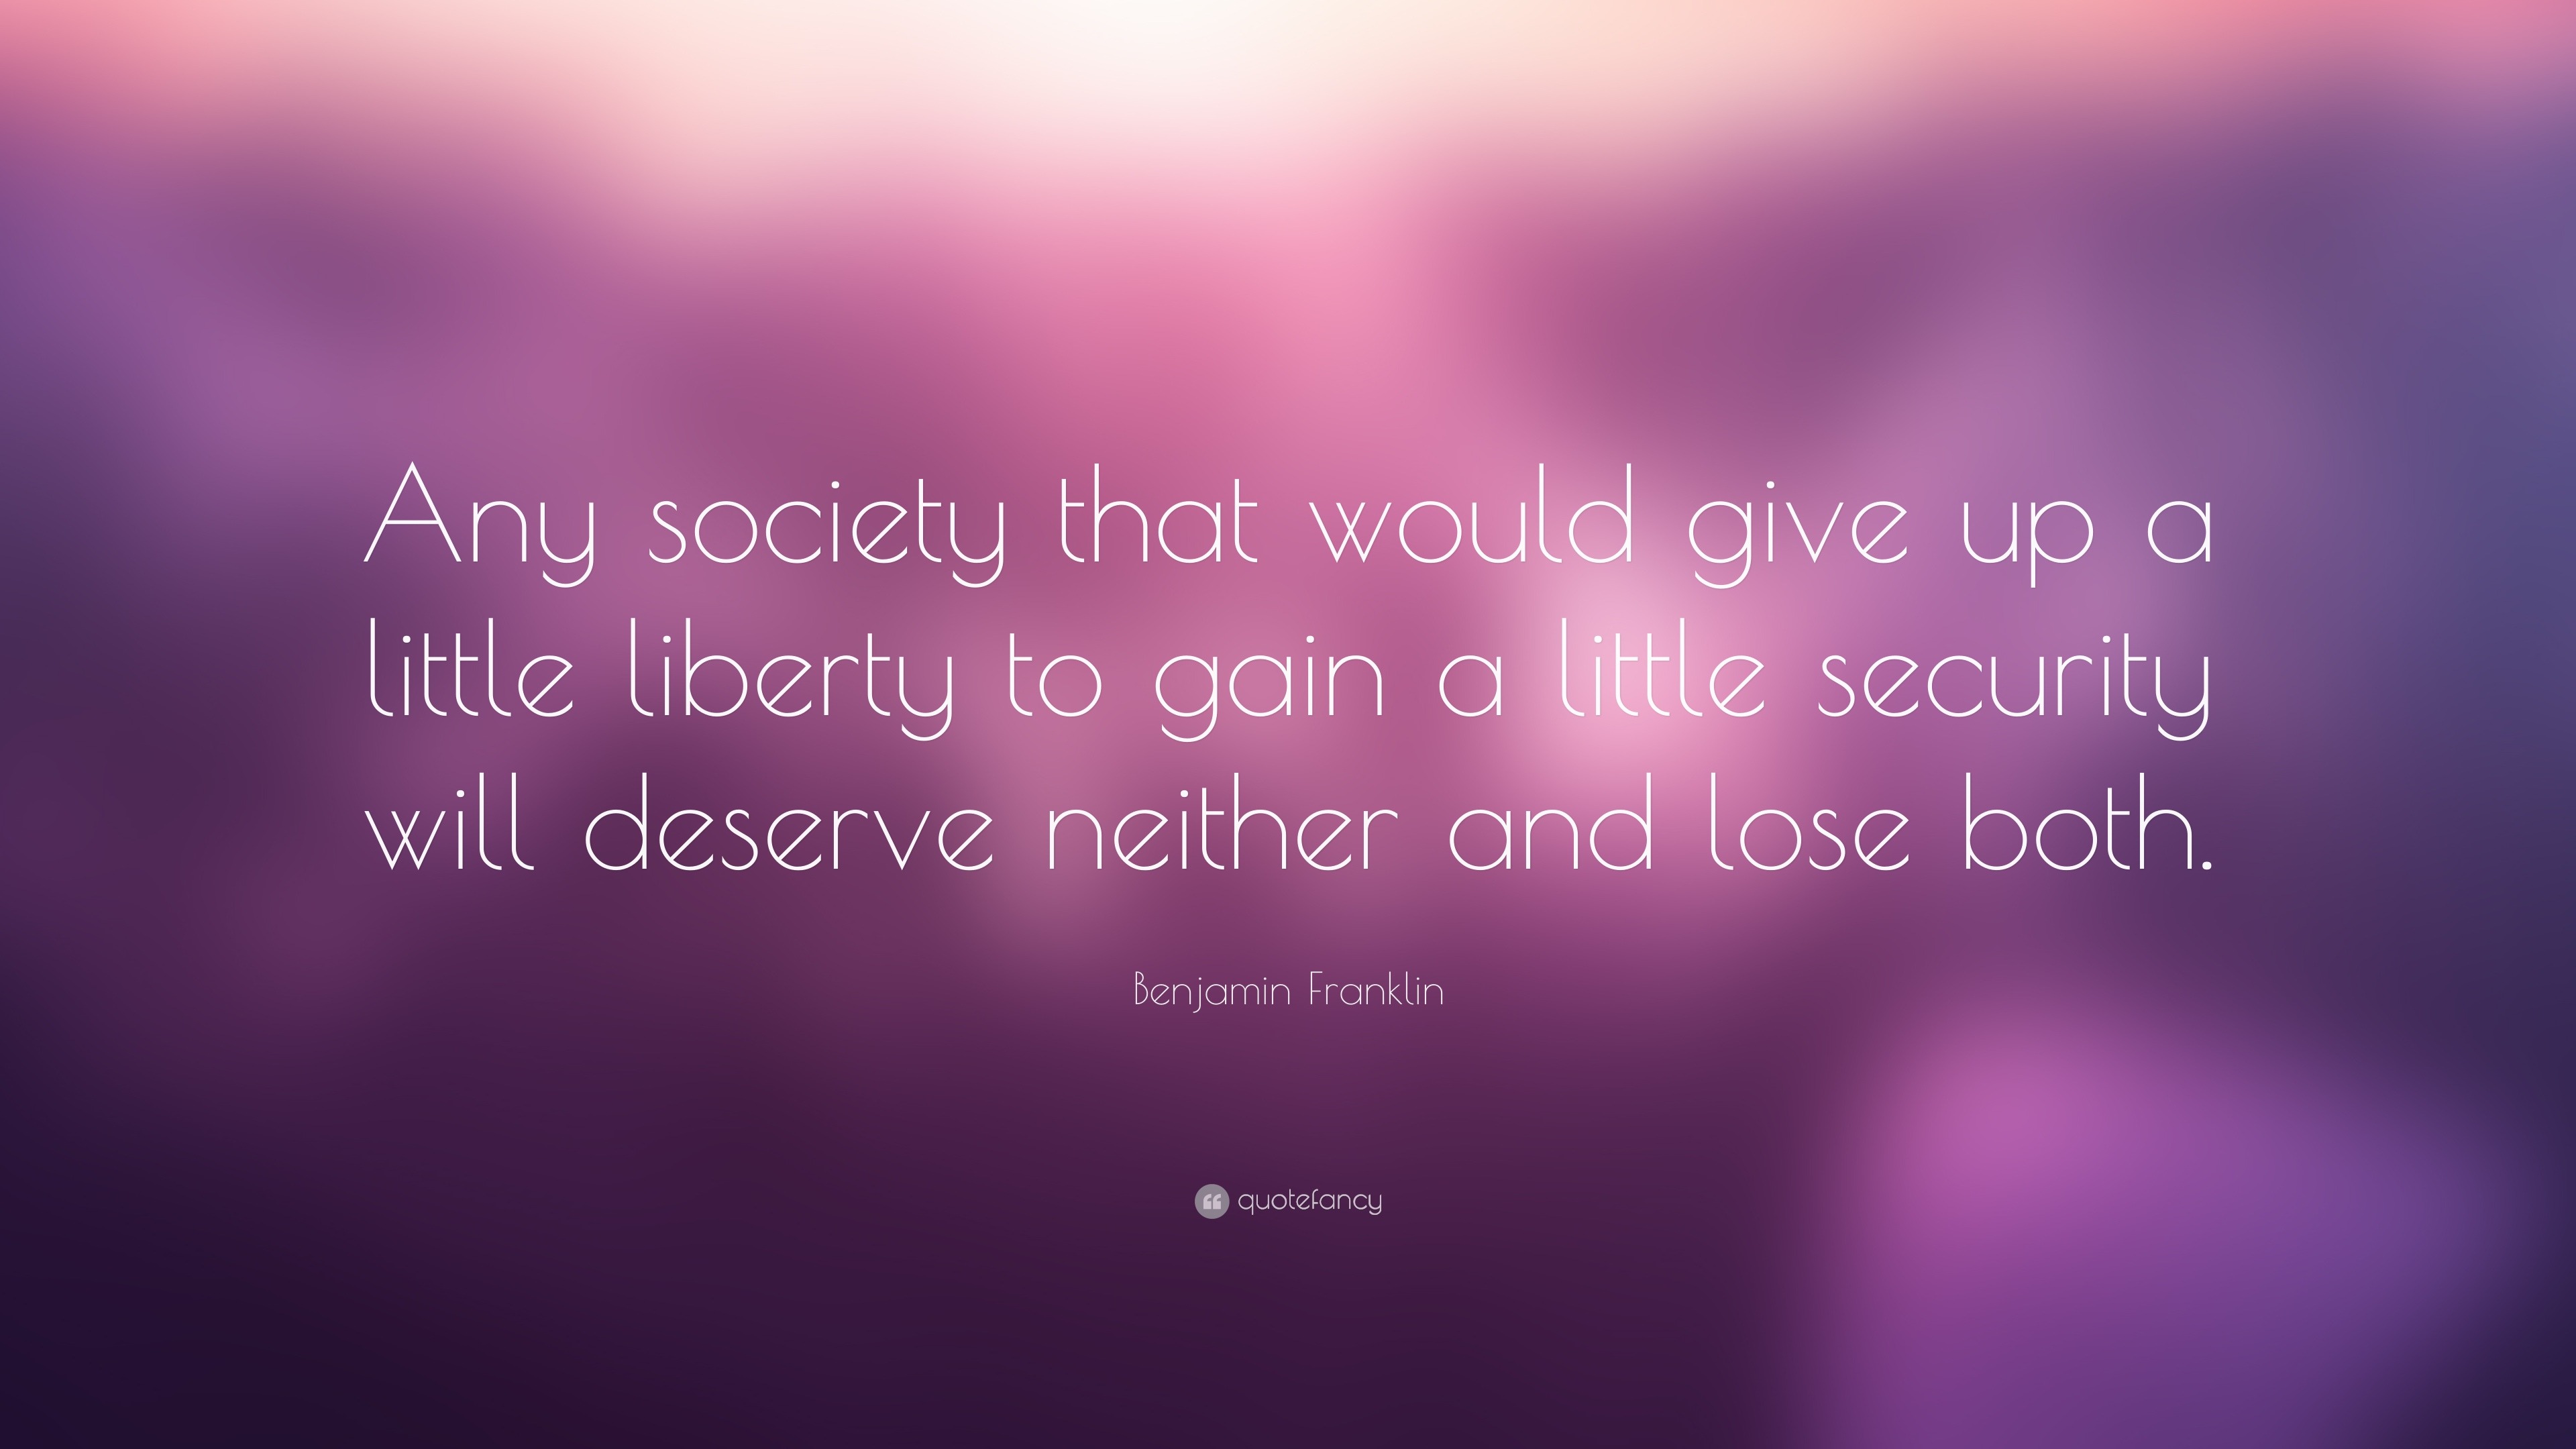 Benjamin Franklin Quote: "Any society that would give up a ...